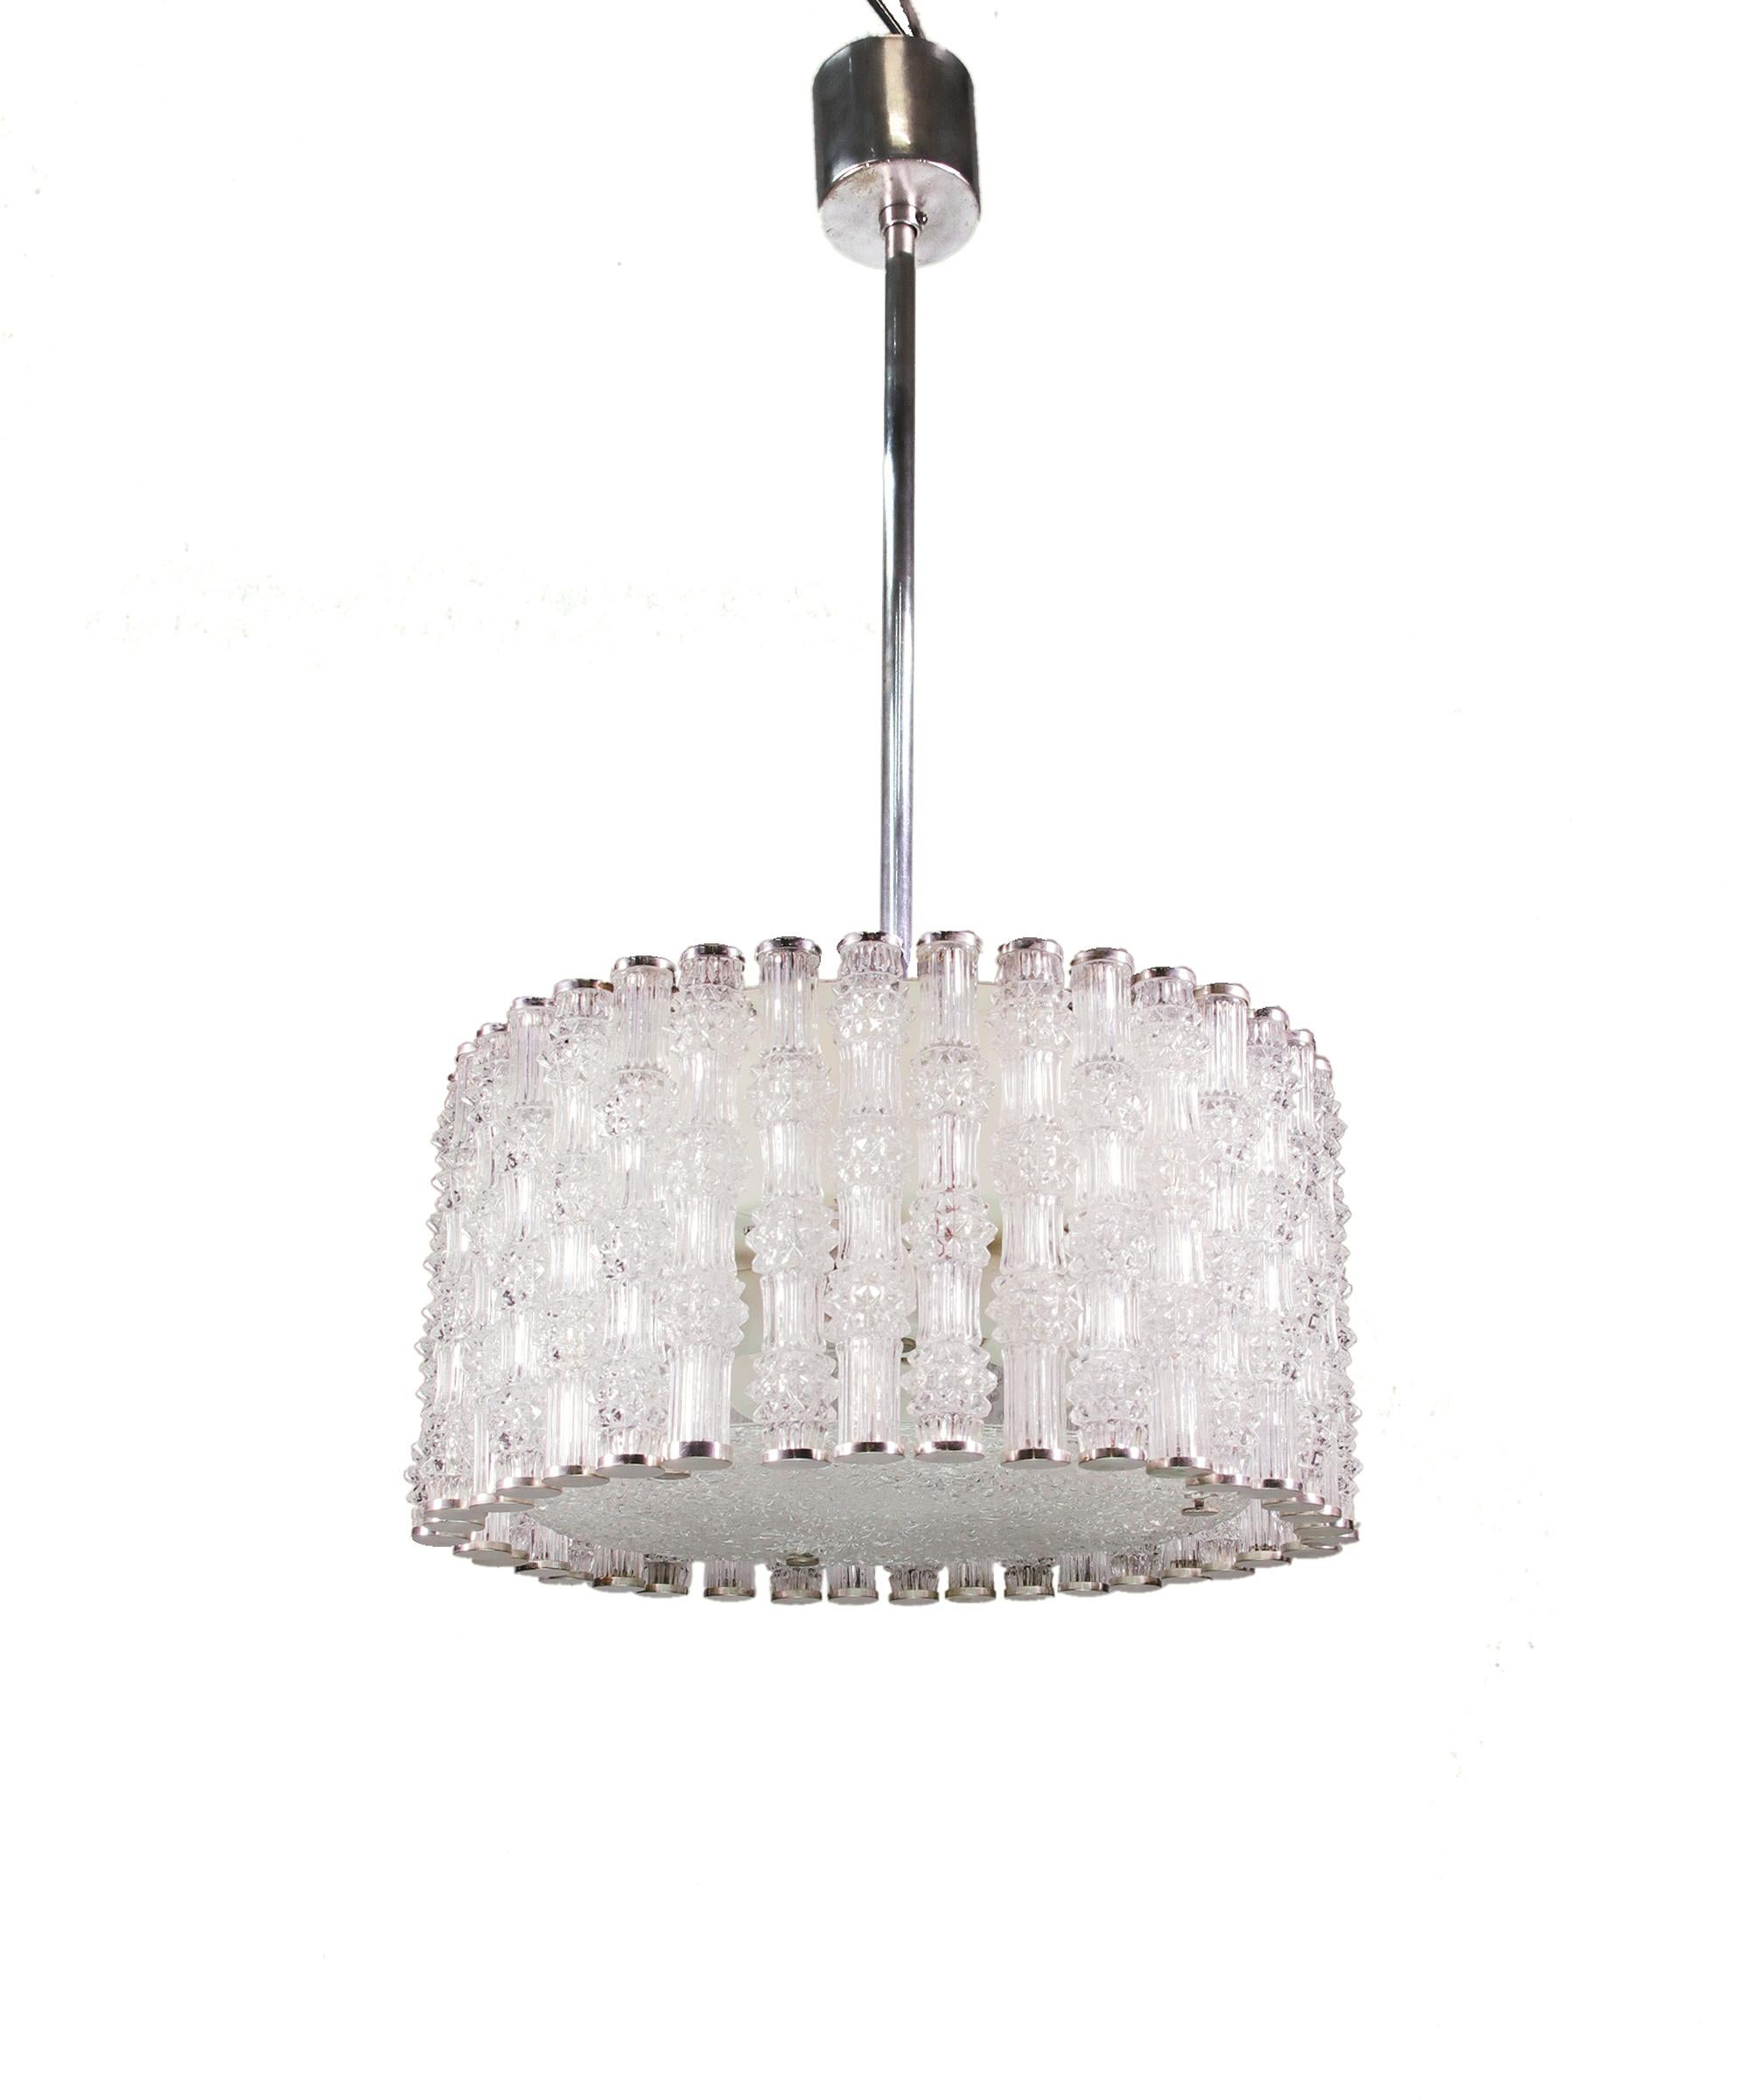 Elegant drum shaped chandelier with textured crystal glass tubes on a chromed frame designed by J.T. Kalmar in Vienna. Chandelier illuminates beautifully and offers a lot of light. Excellent vintage condition. Gem from the time. With this light you